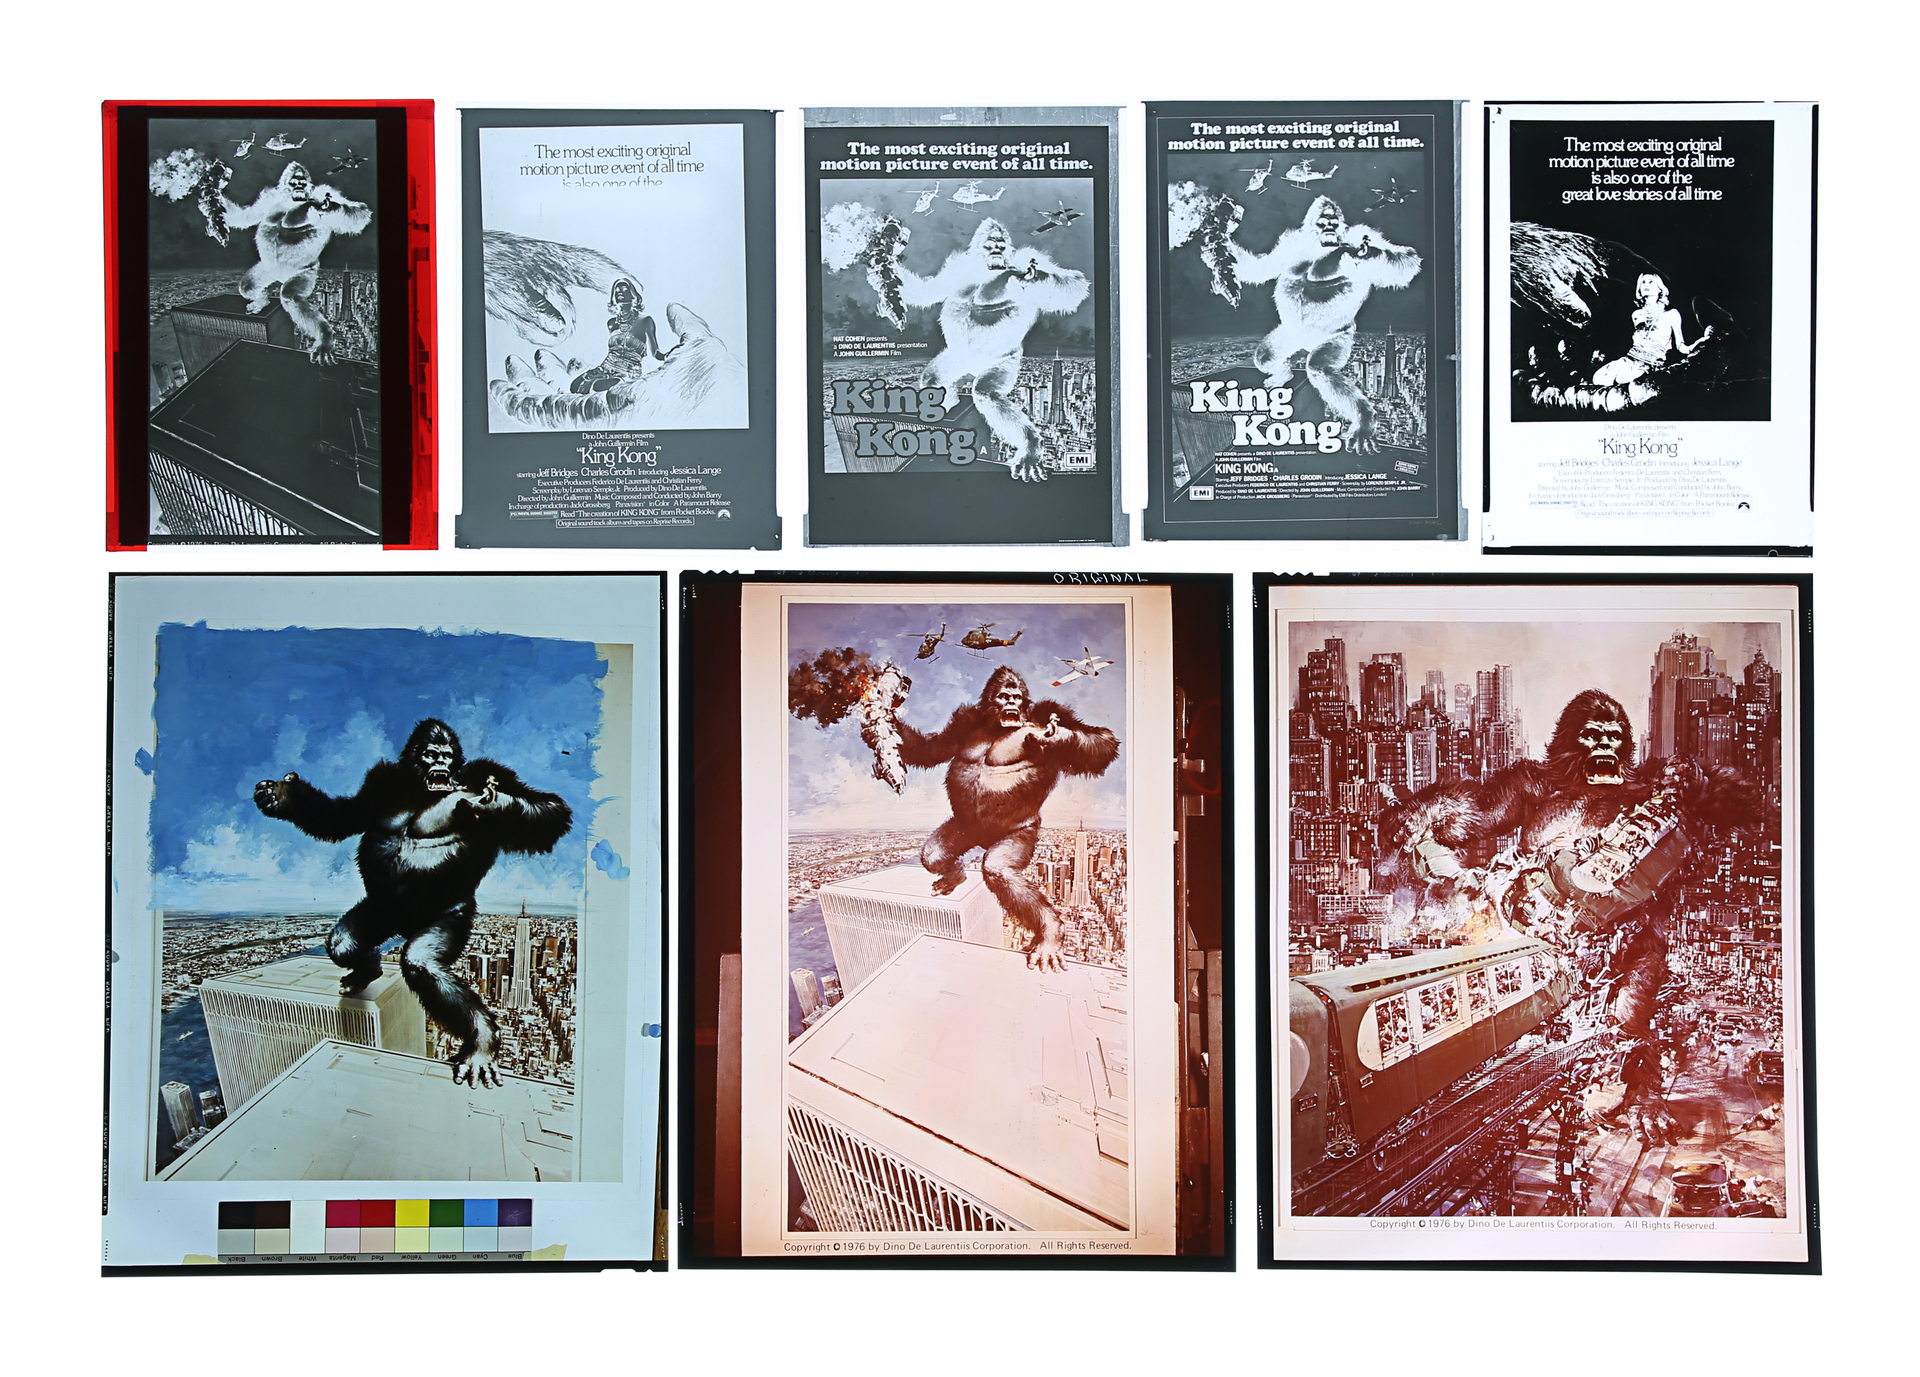 KING KONG (1976) - FEREF ARCHIVE: 1 of 1 Proof Print, with Original Transparencies, Negatives and Fi - Image 4 of 5